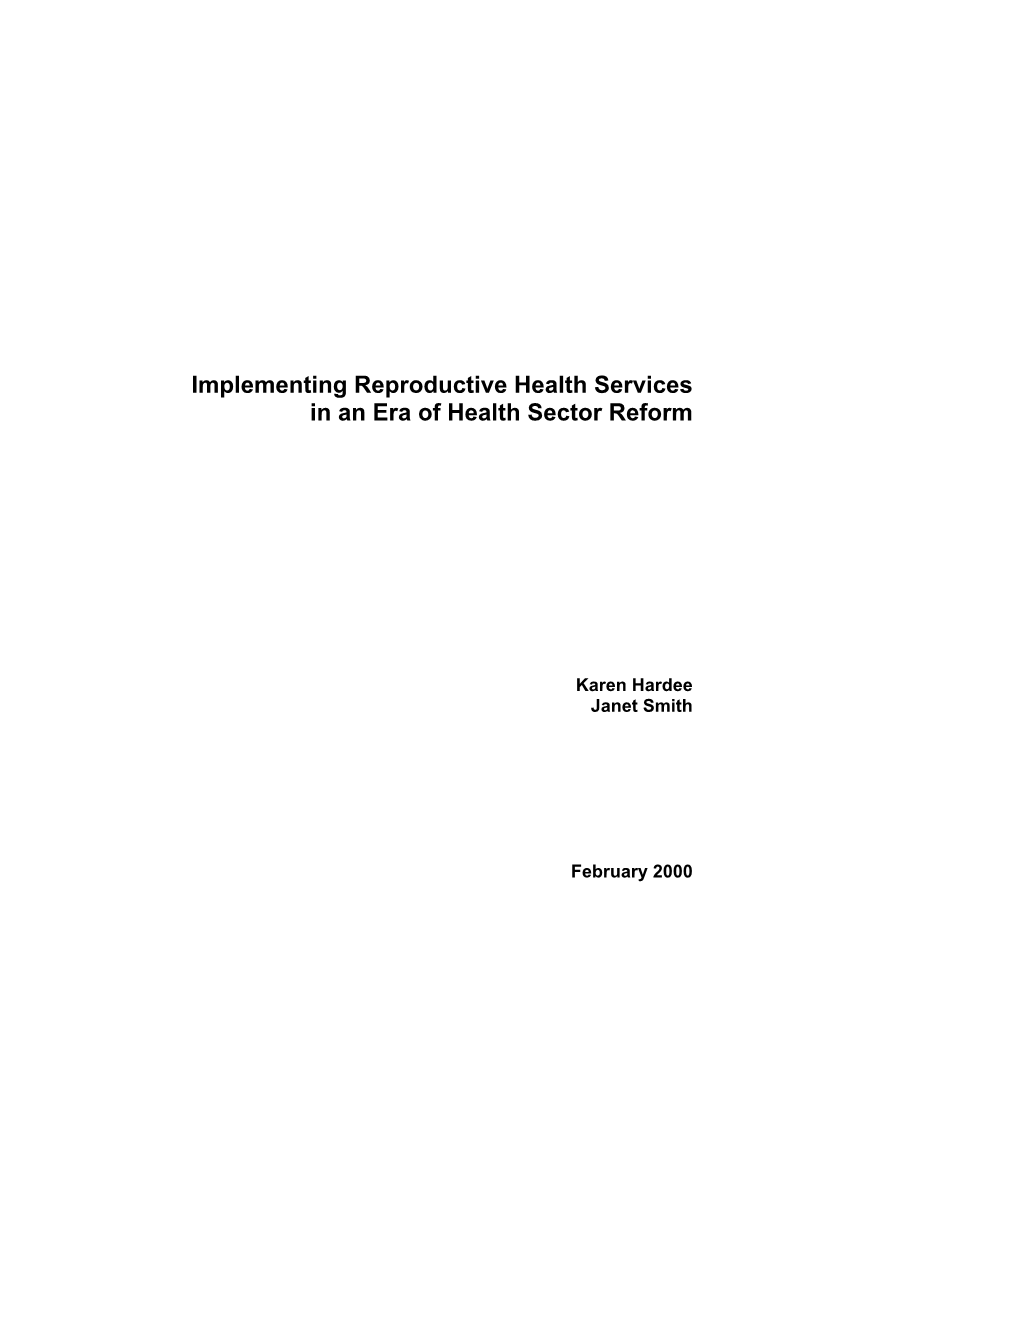 Implementing Reproductive Health Services in an Era of Health Sector Reform